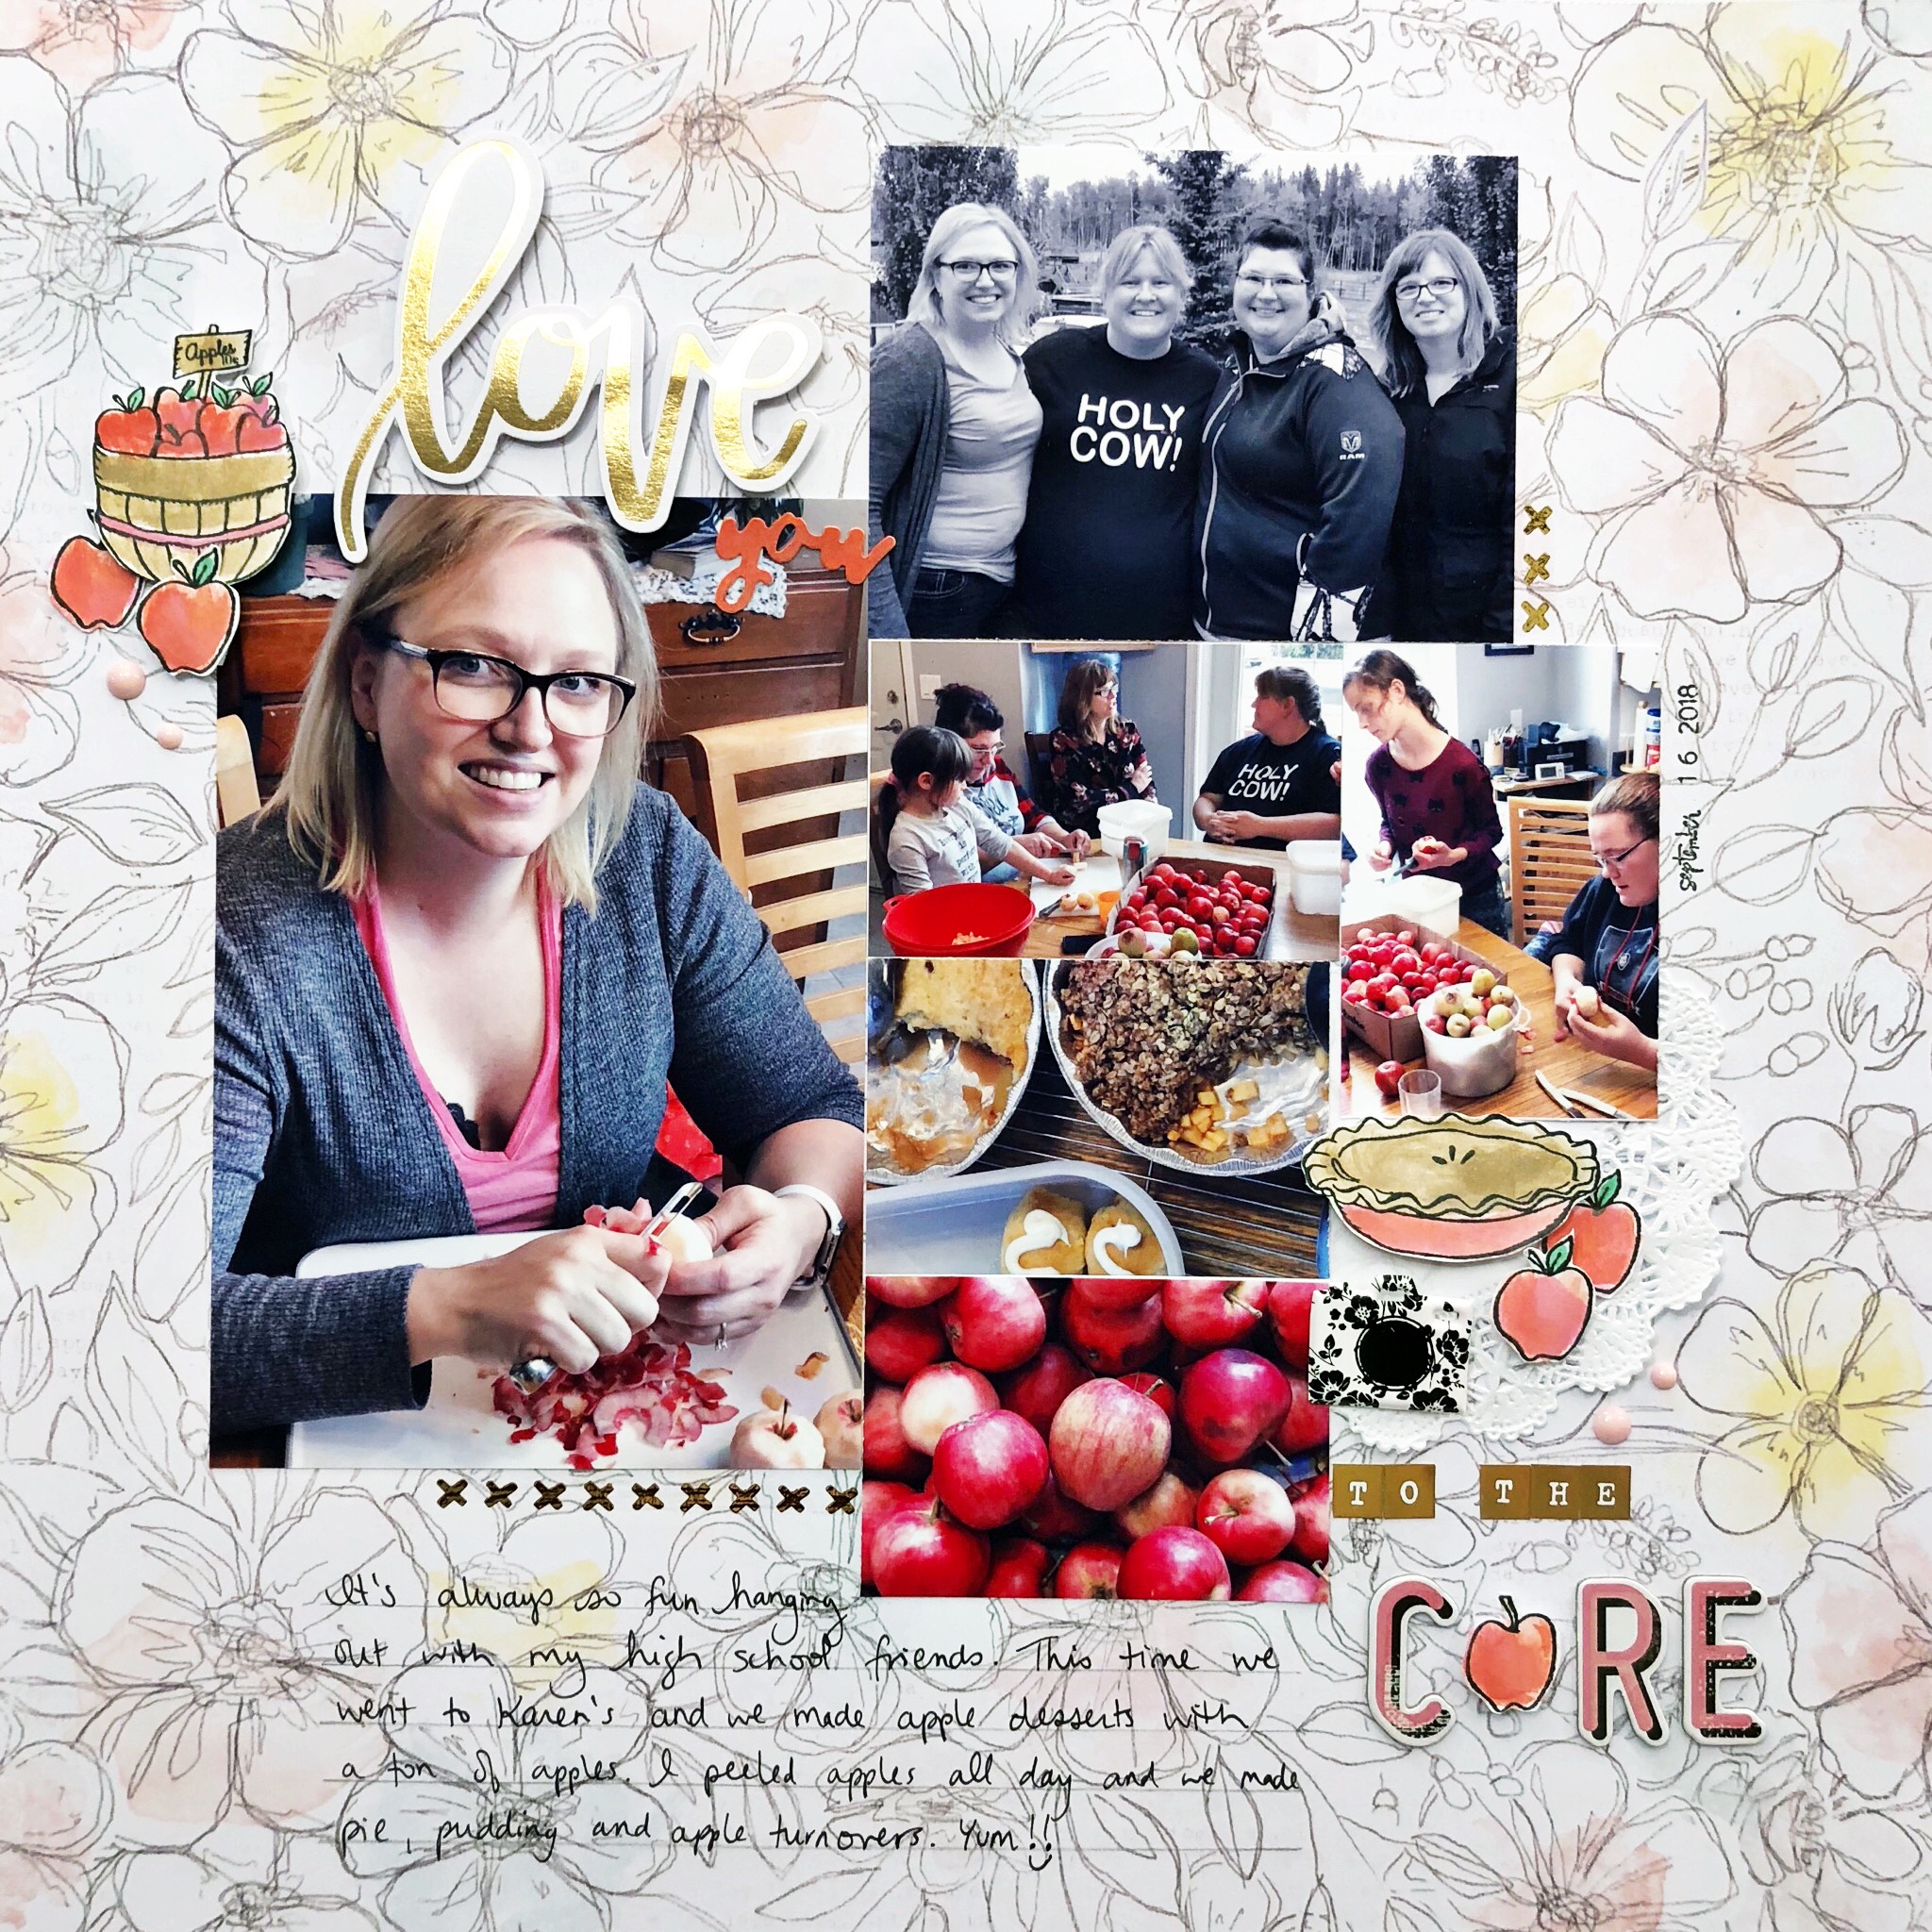 I love this fun fall scrapbook layout with apples. 6 photos and such a fun title!